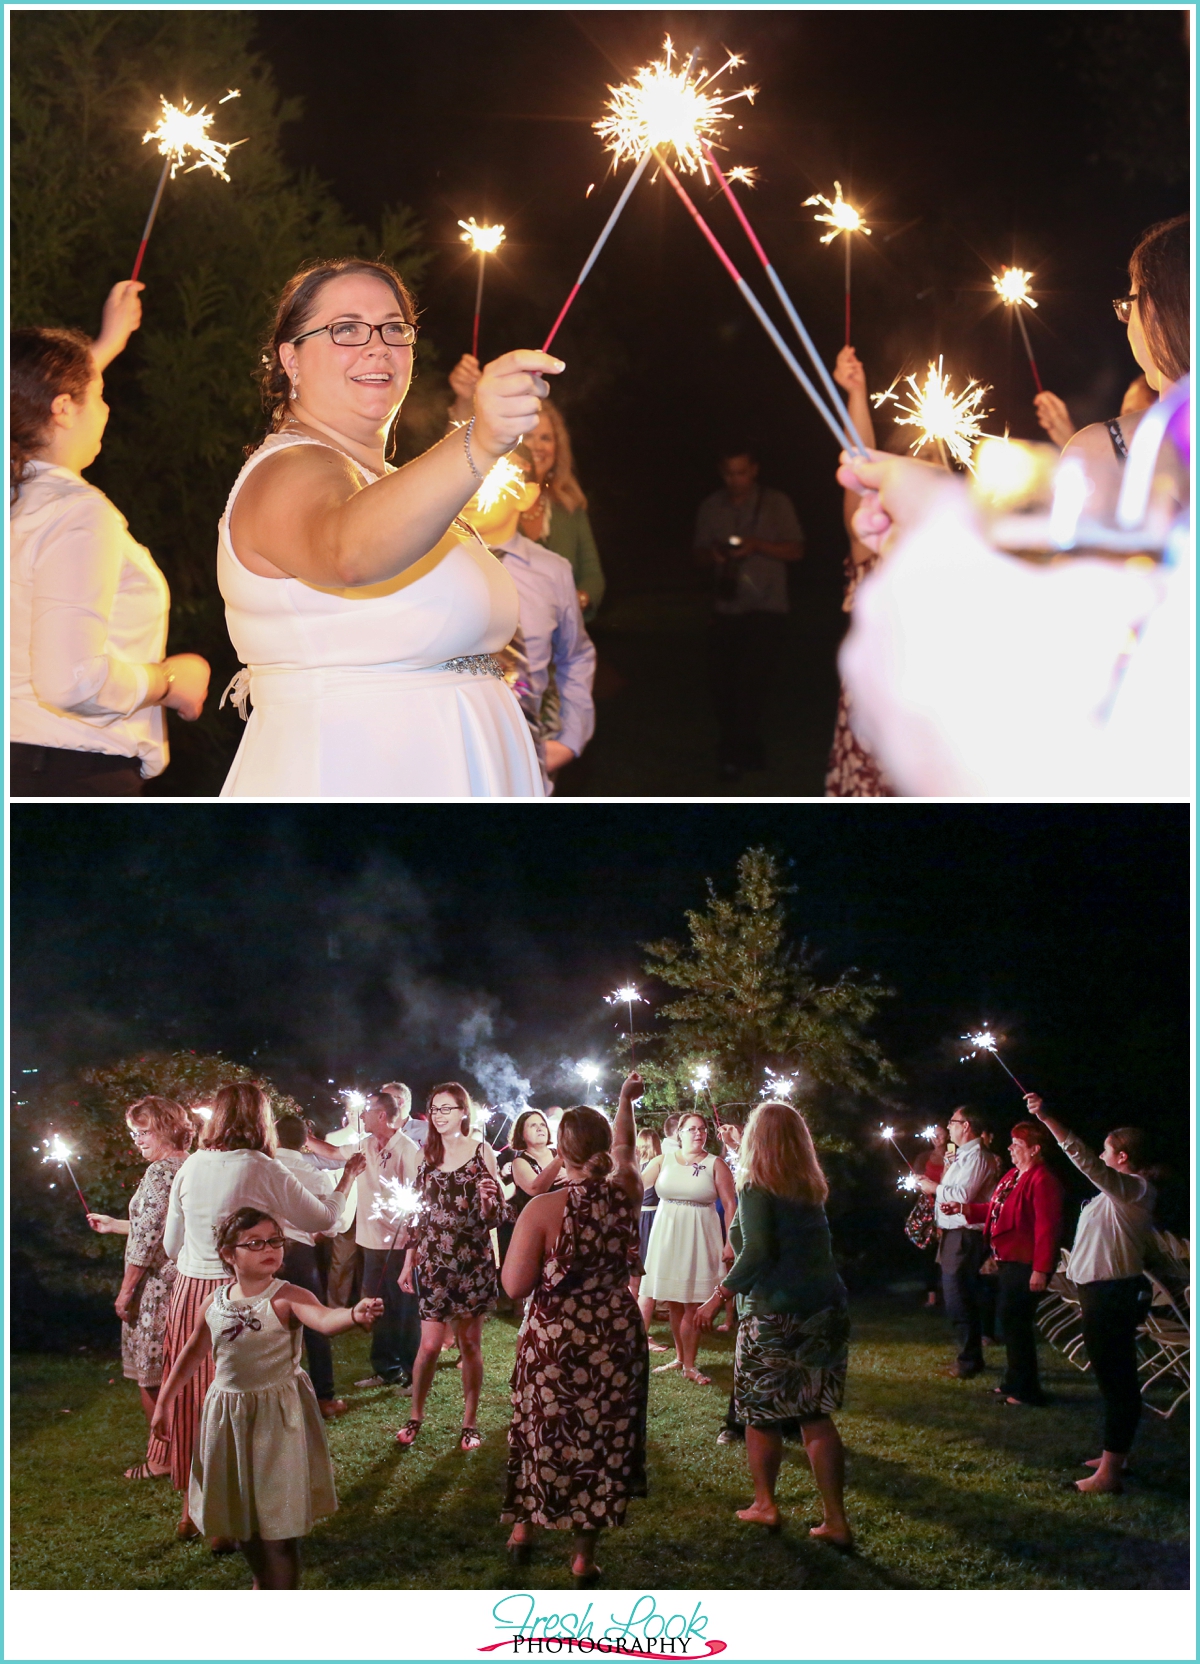 sparkler exit at the wedding